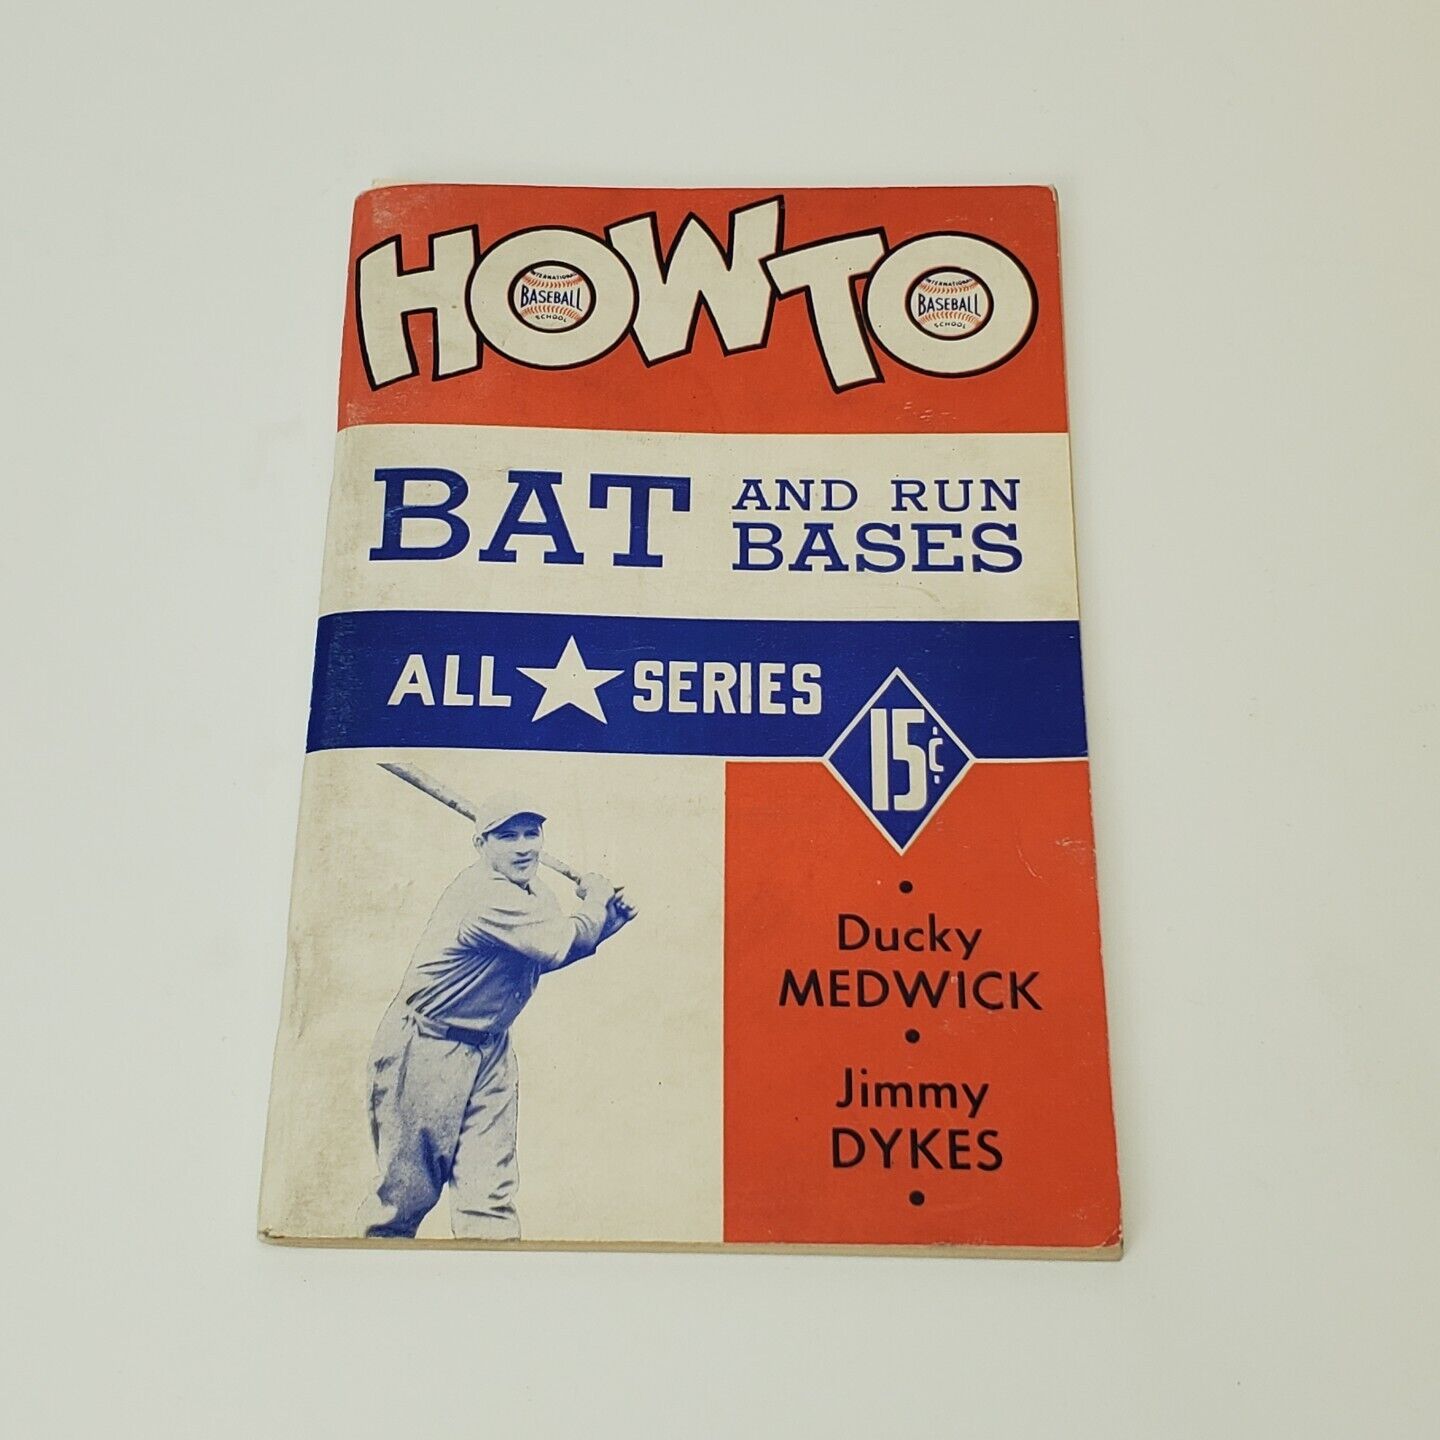 1941 How To Bat and Run bases all Star series Ducky Medwick Jimmy Dykes em bxa